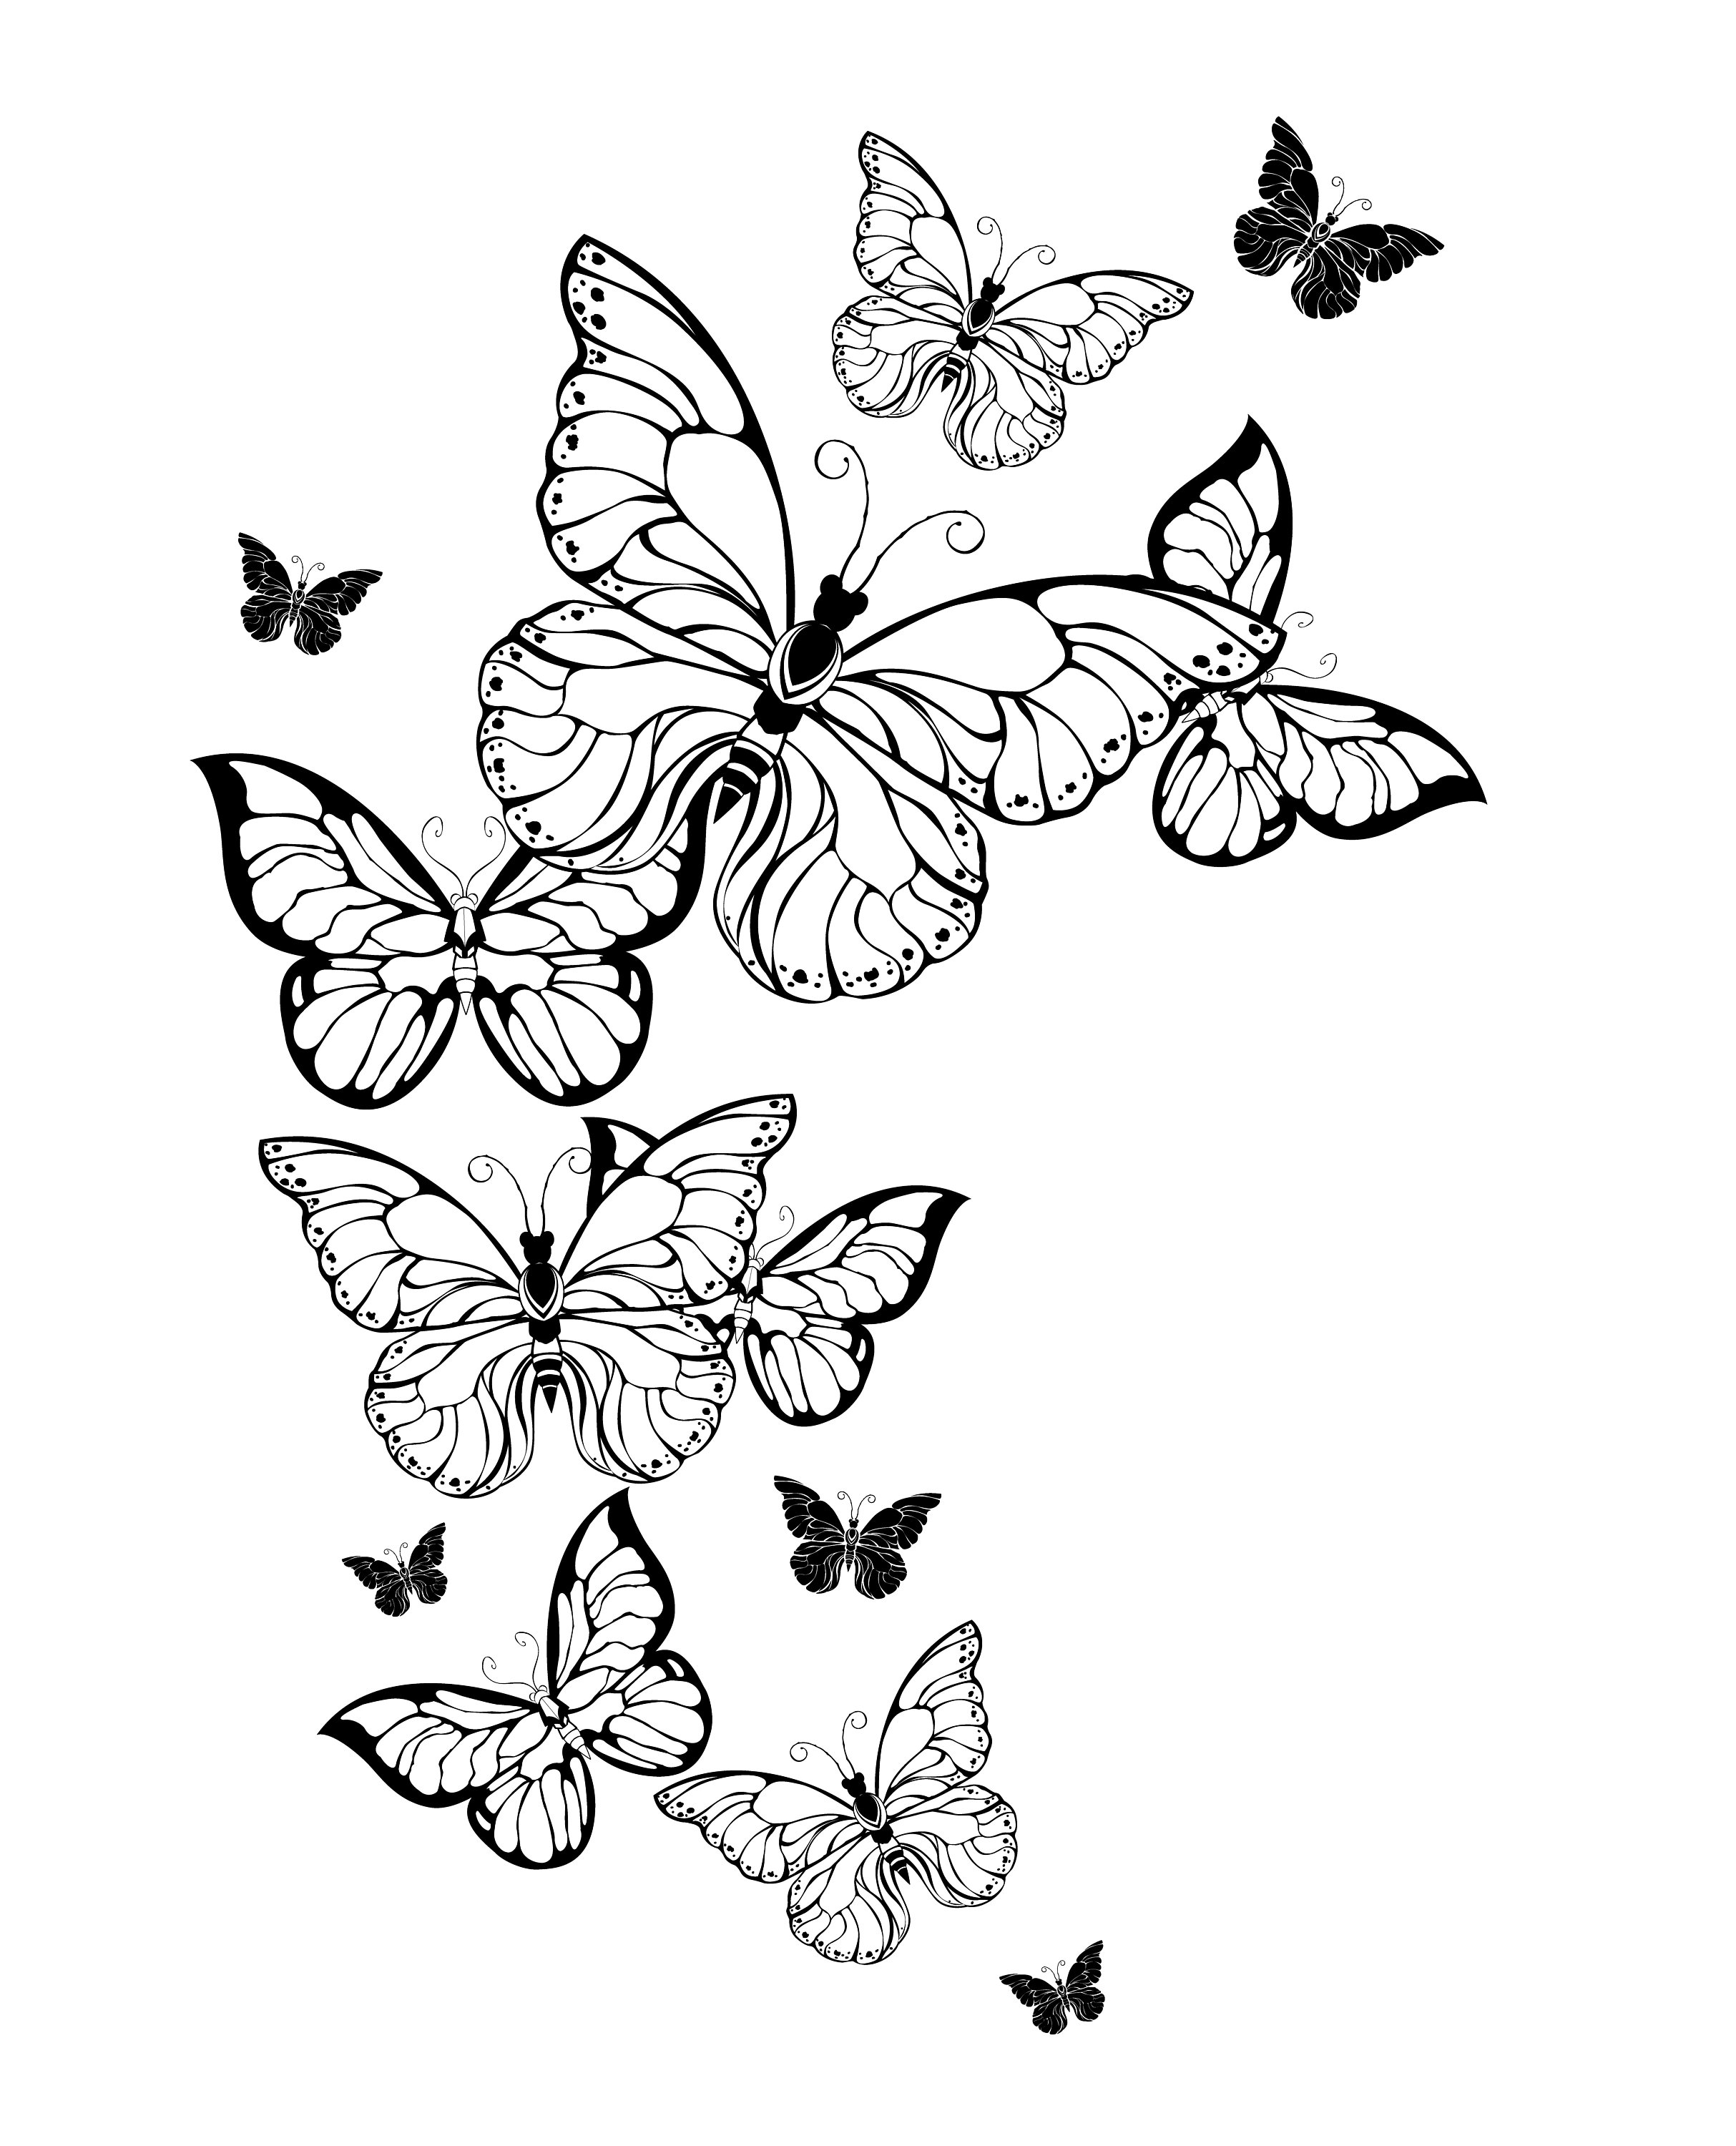 Butterfly coloring pages butterfly coloring book for adults downloadable digital printable